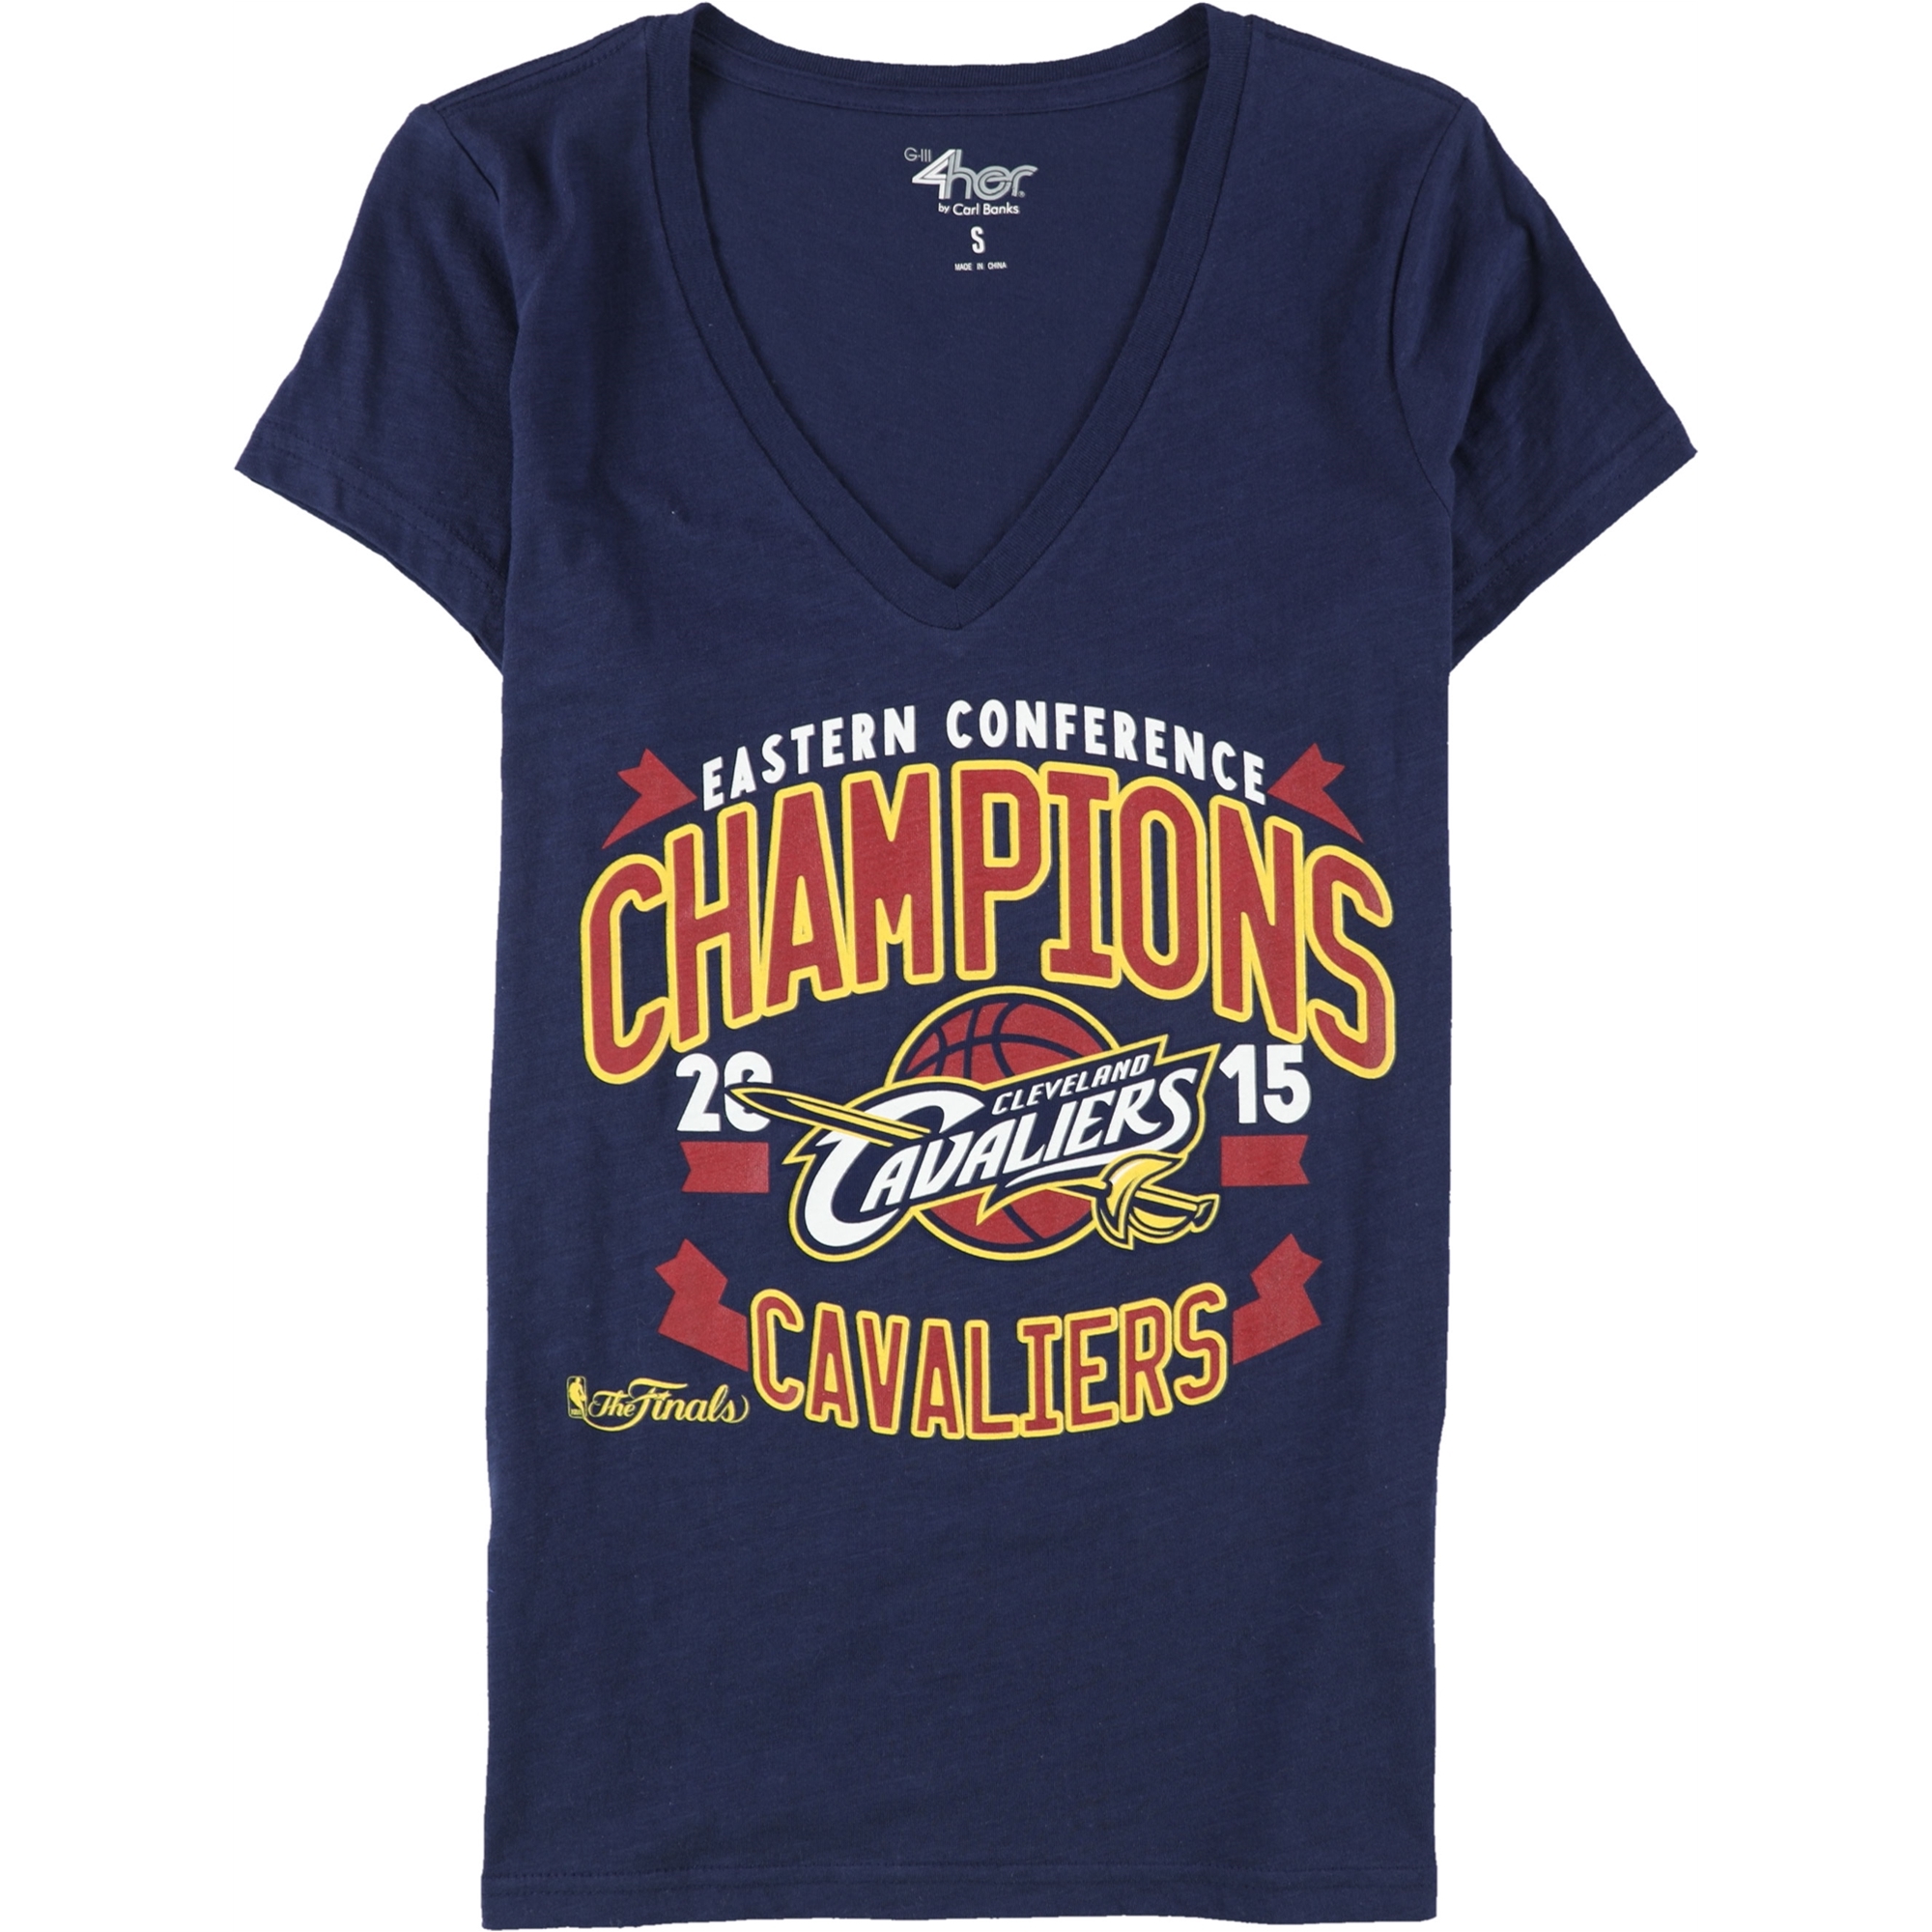 Cavaliers-branded 'Eastern Conference champions' gear went on sale